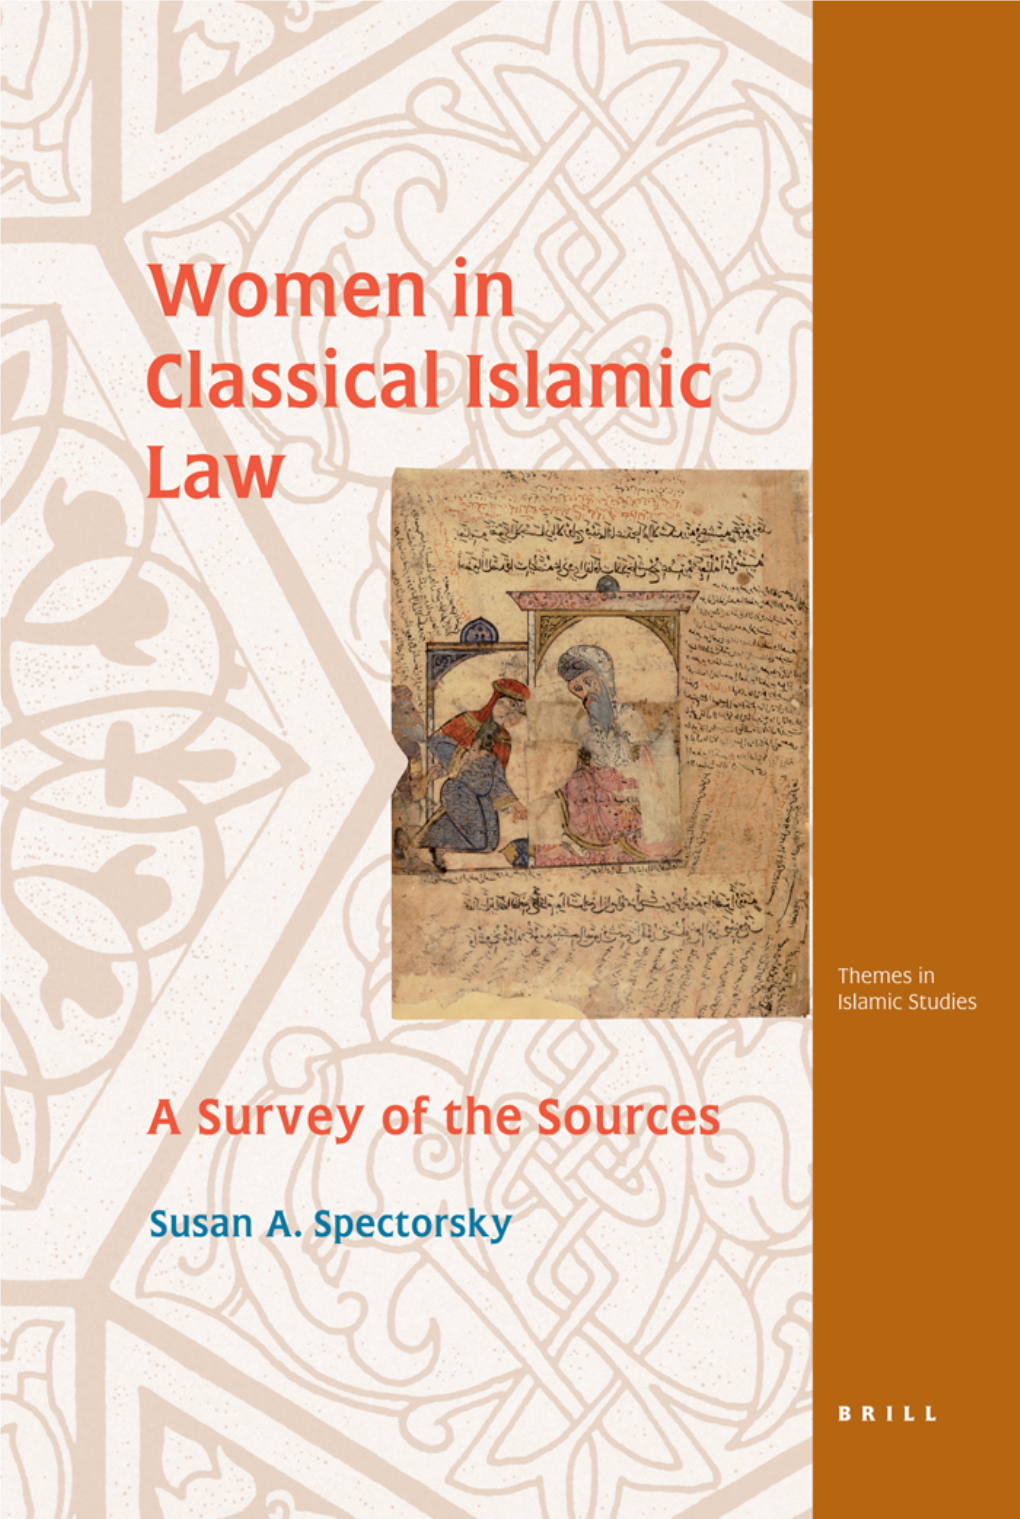 Women in Classical Islamic Law: a Survey of the Sources